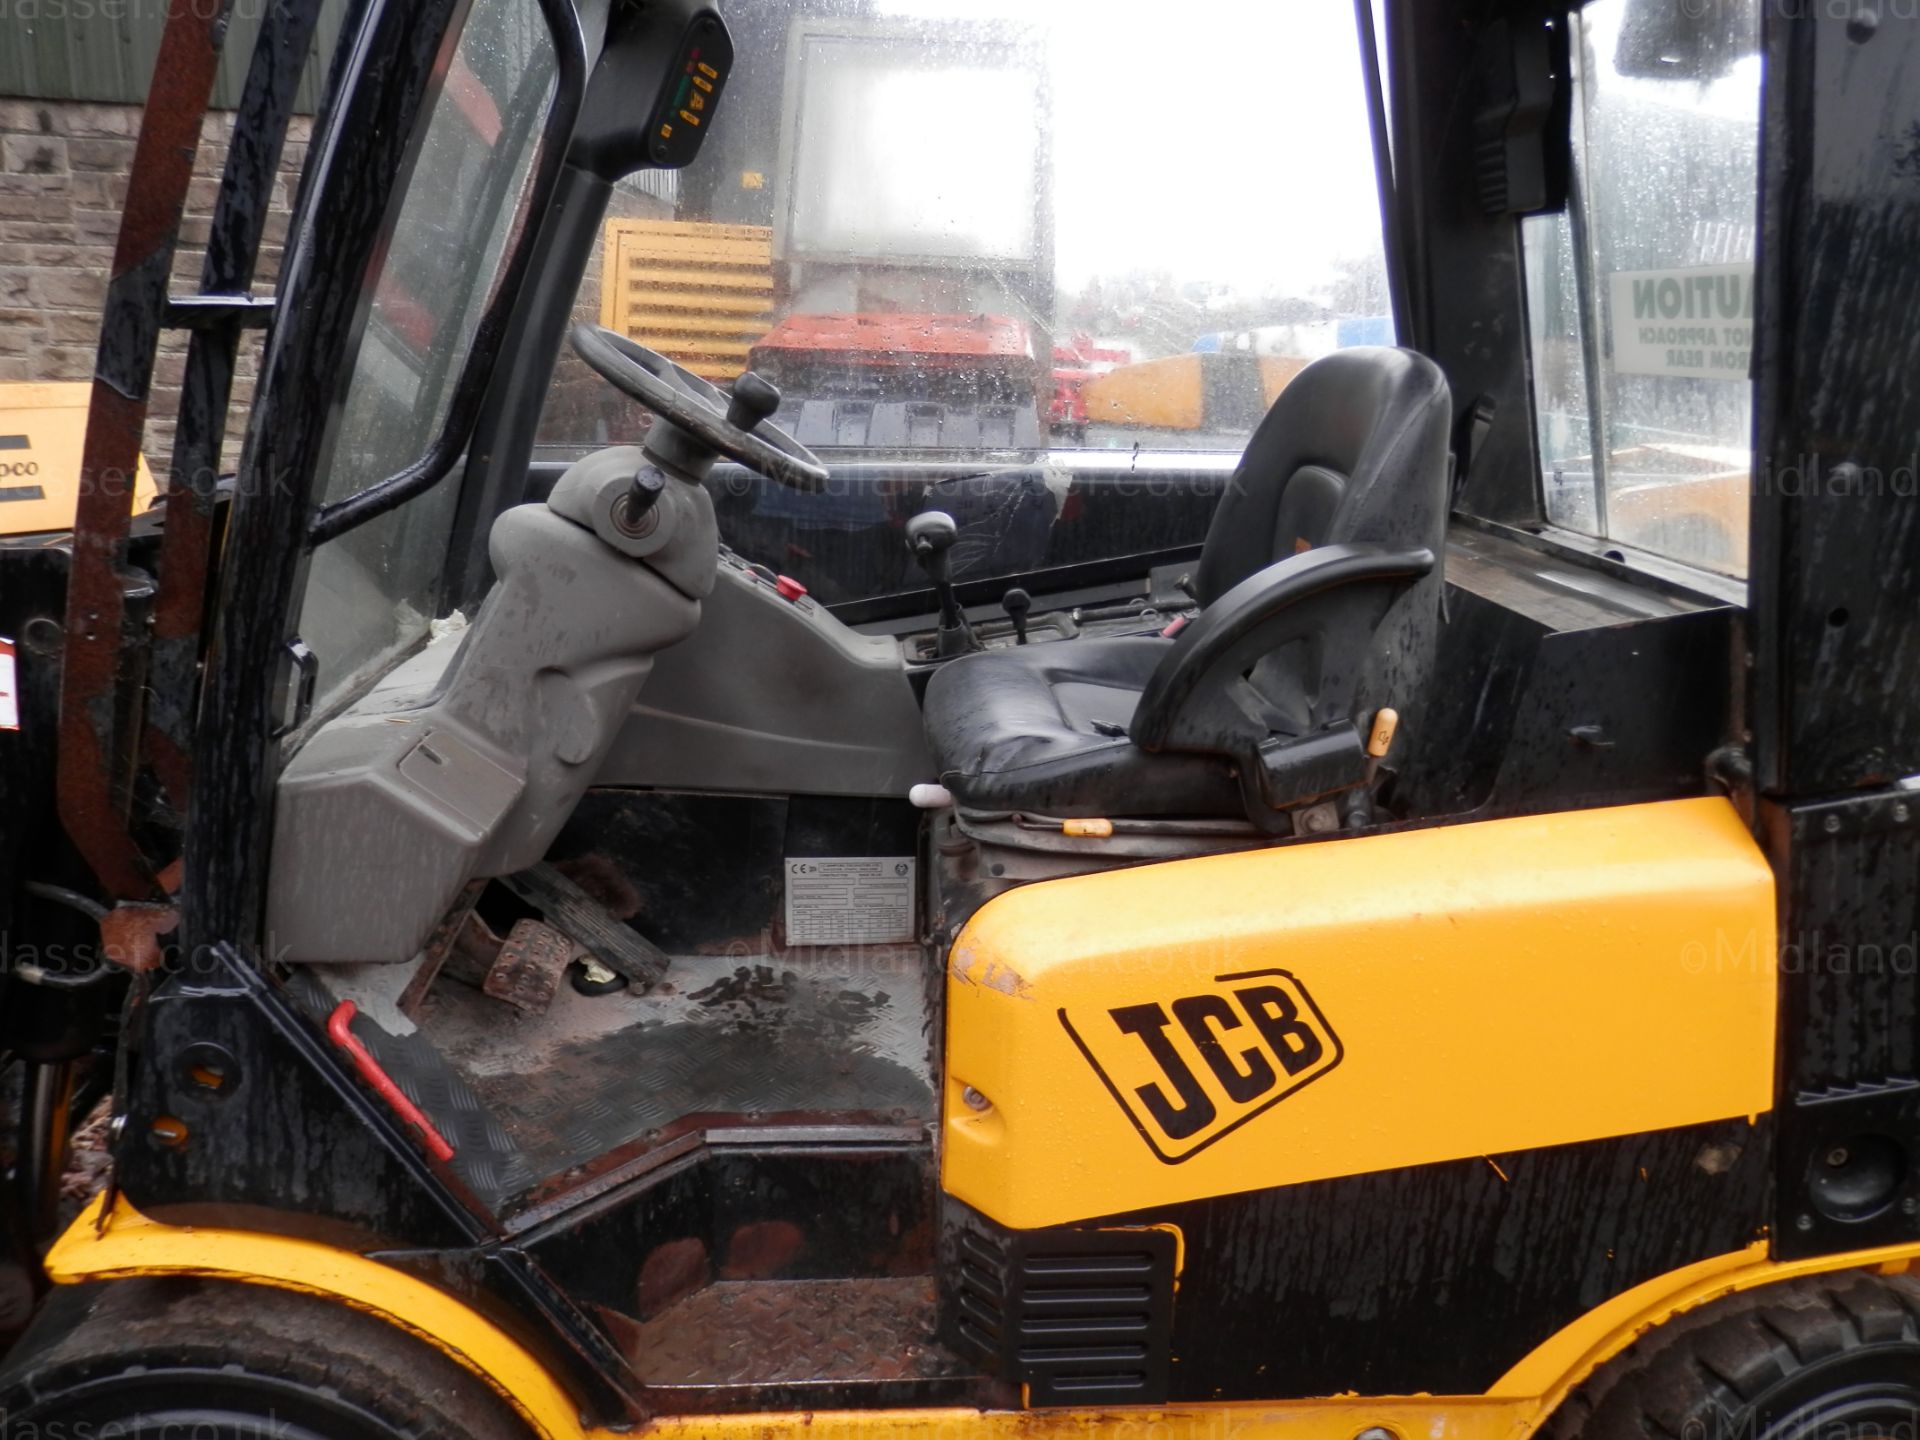 DS - 2009 JCB TELE TRUCK WITH ROTATOR   YEAR OF MANUFACTURE: 2009 WEIGHT: 5200 kg   FULL CAB ROTATOR - Image 10 of 11